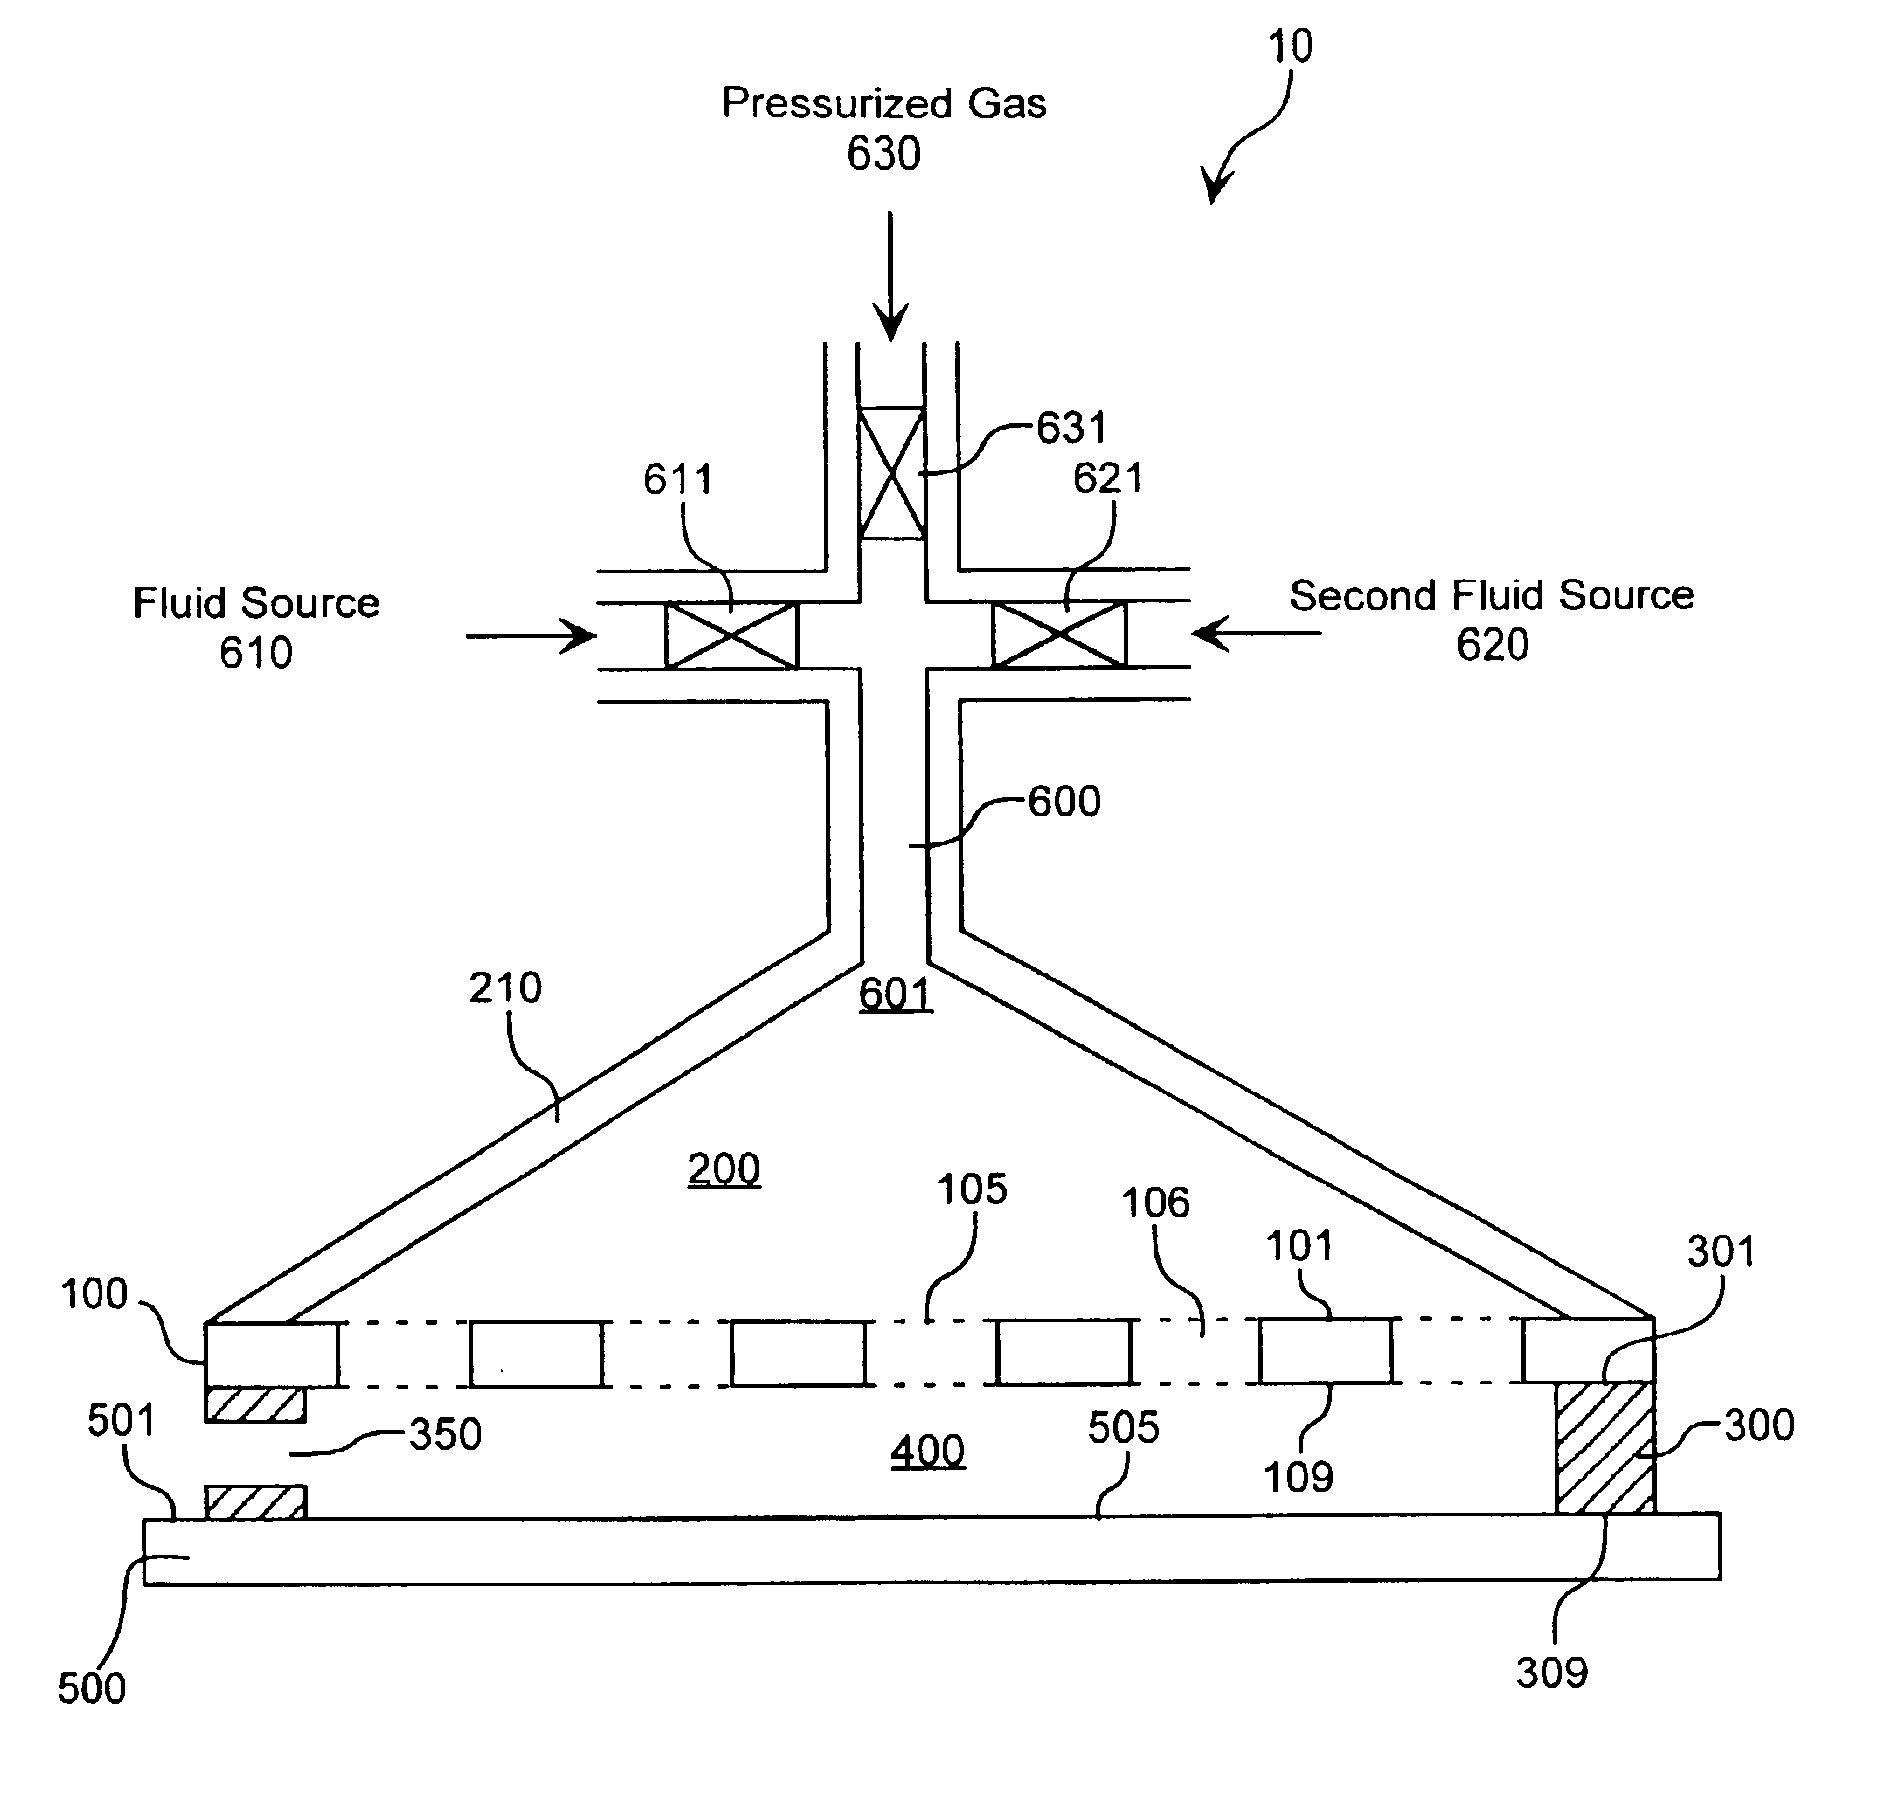 Apparatus for coating a substrate quickly and uniformly with a small volume of fluid